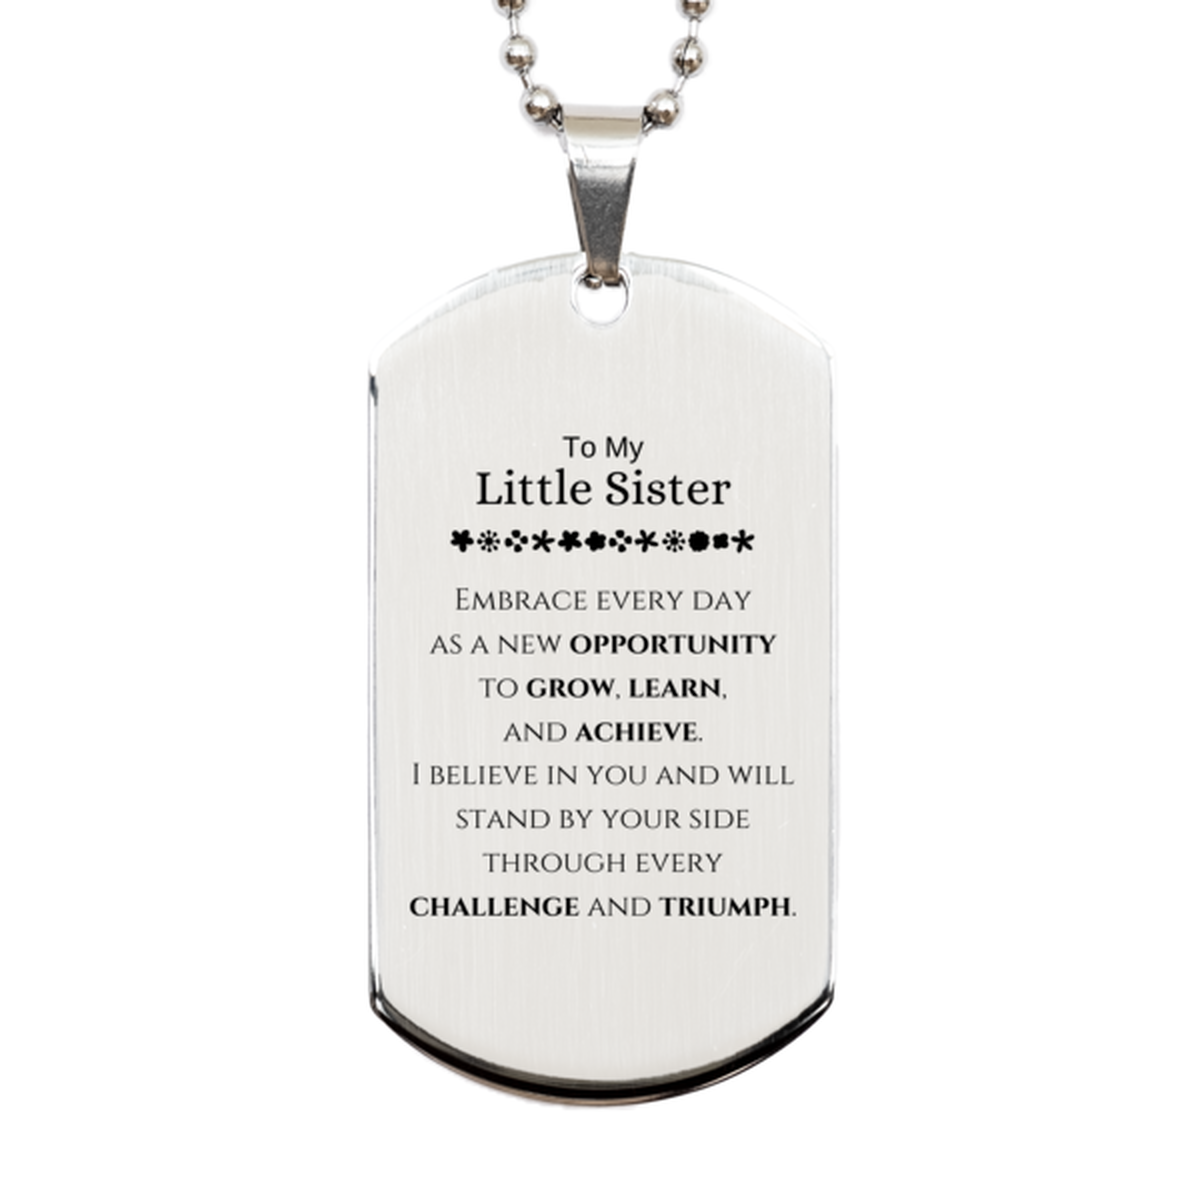 To My Little Sister Gifts, I believe in you and will stand by your side, Inspirational Silver Dog Tag For Little Sister, Birthday Christmas Motivational Little Sister Gifts